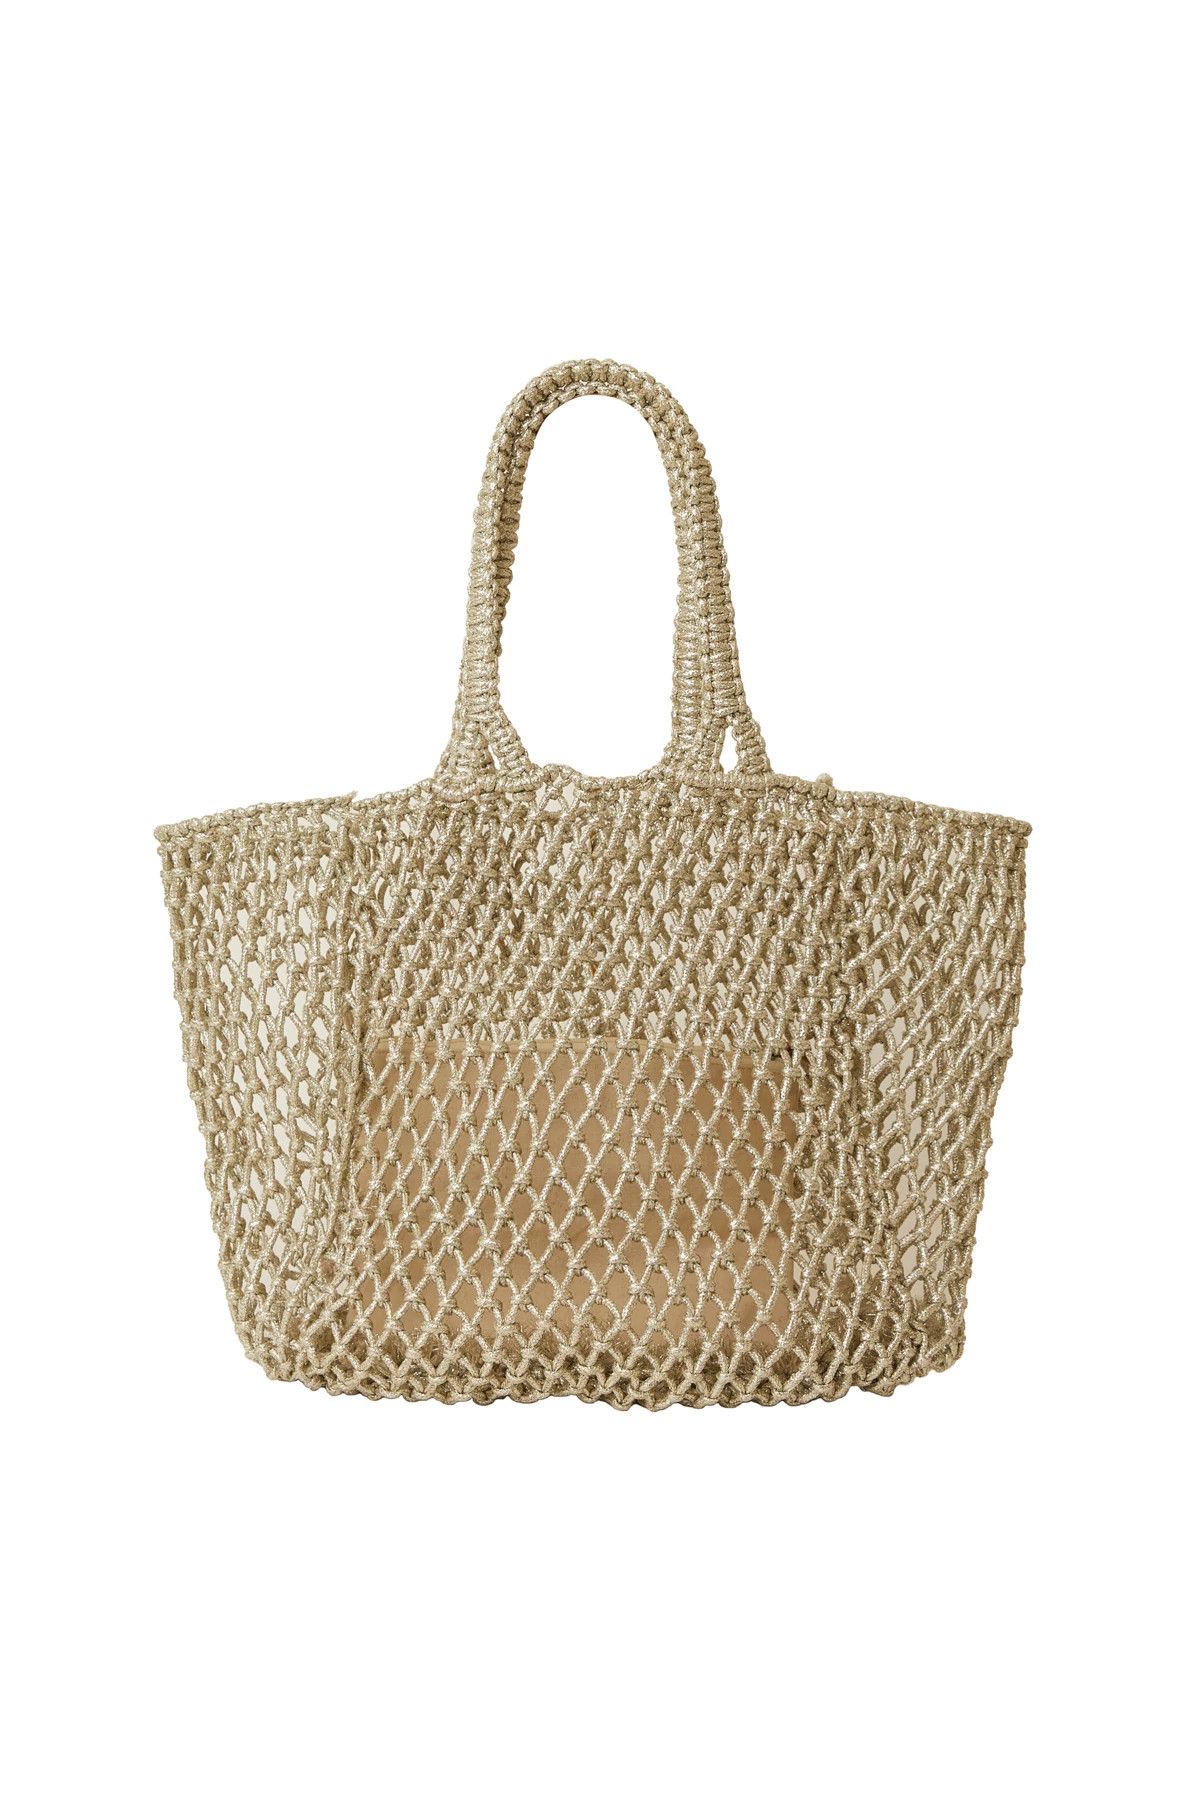 Siena Tote Bag | Everything But Water